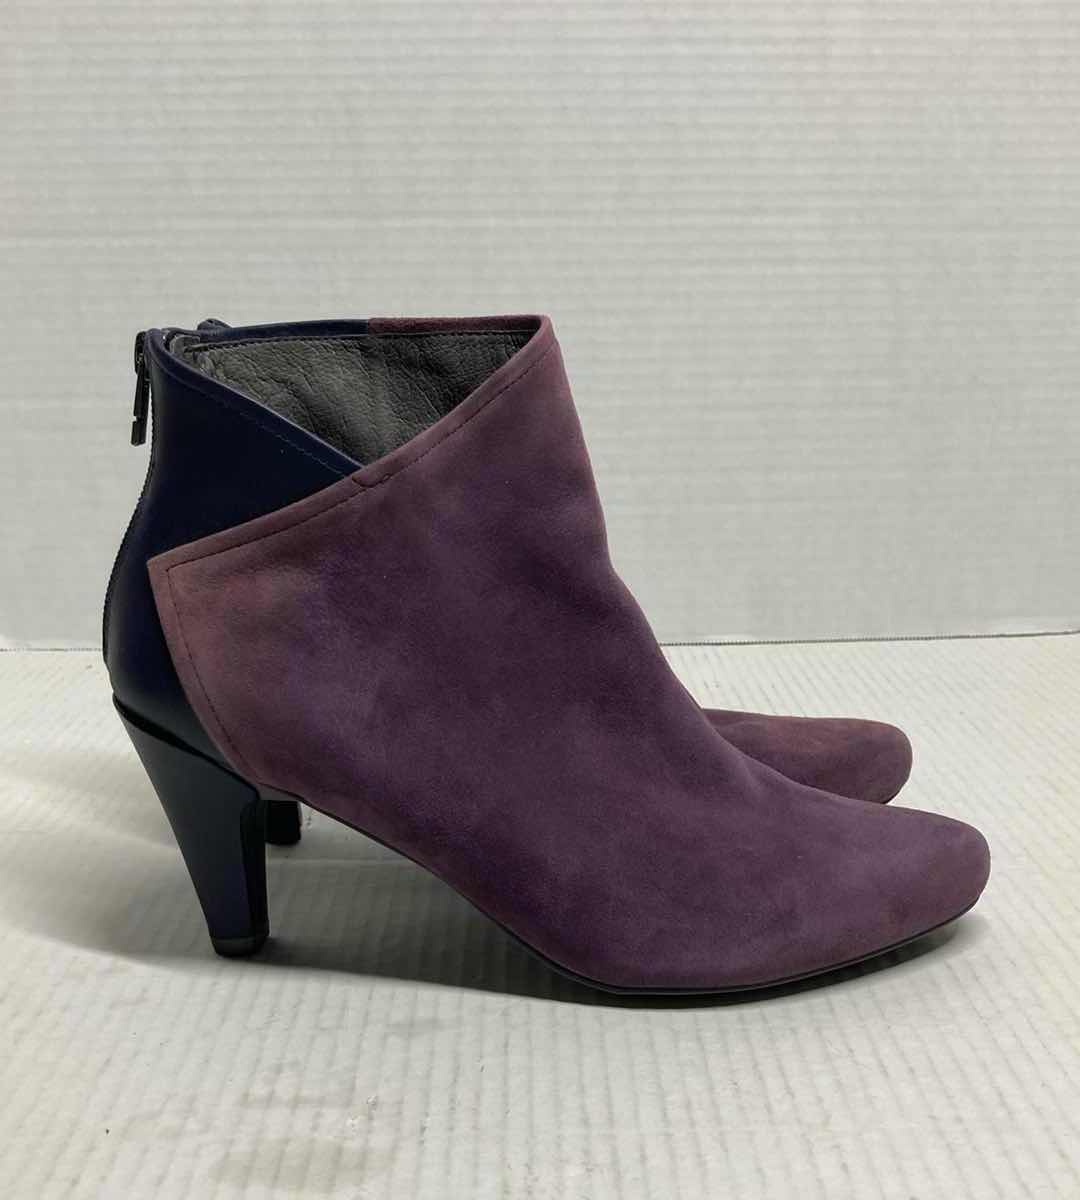 Photo 4 of TSUBO PURPLE & BLUE SUEDE LEATHER ANKLE HEEL BOOTS WOMAN’S SIZE 9